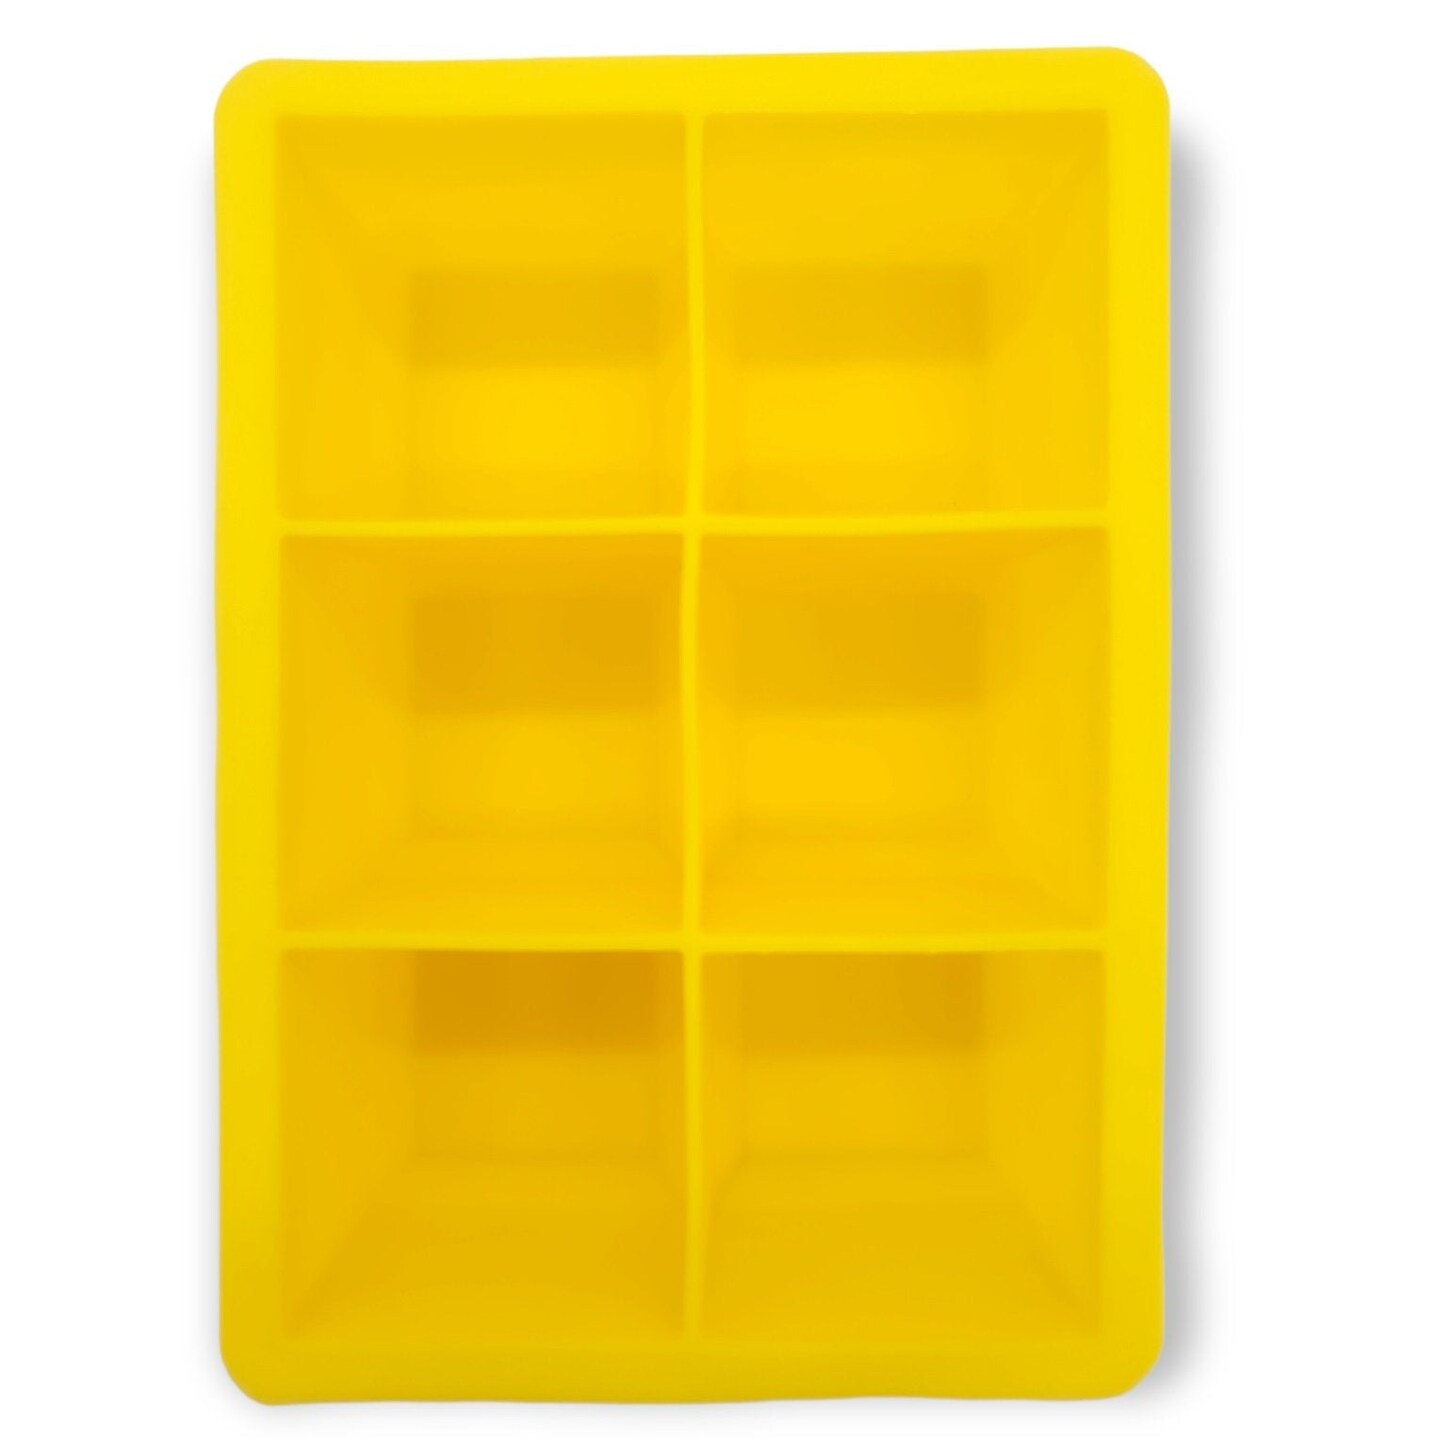 Silicone Ice Mold Maker Durable Mold For Large Ice Cube Silicone